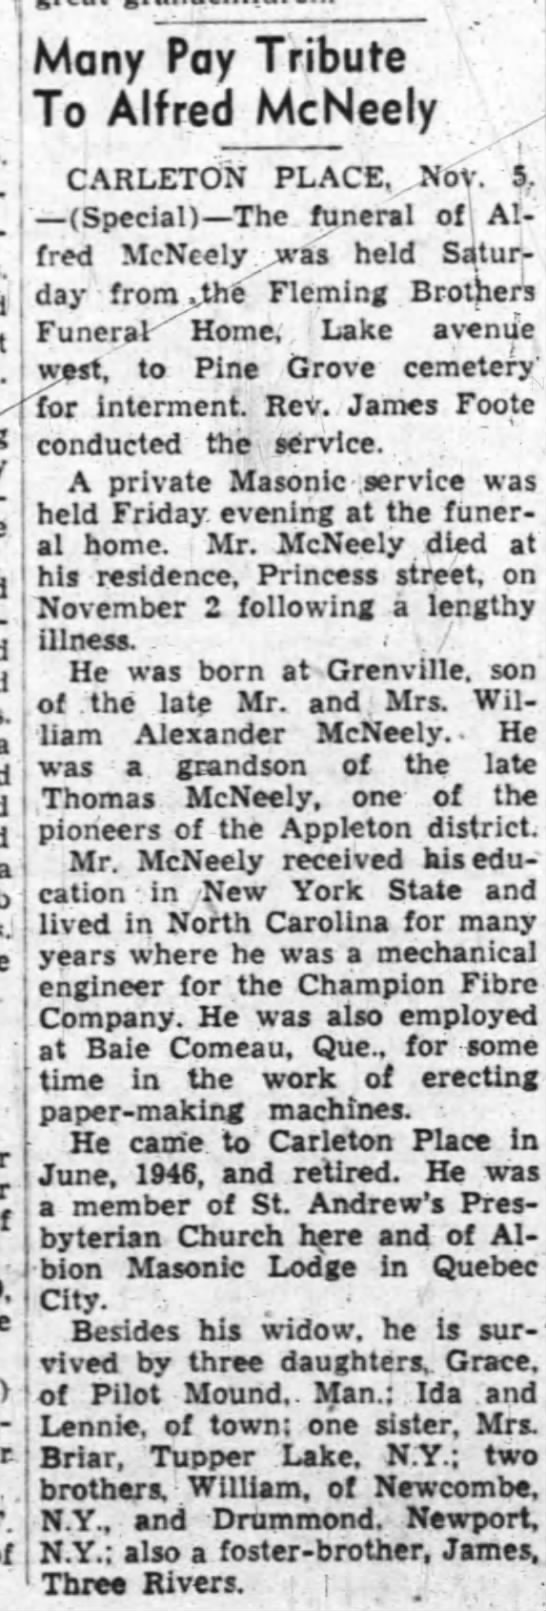  - ; com-j . Many Pay Tribute To Alfred McNeely...